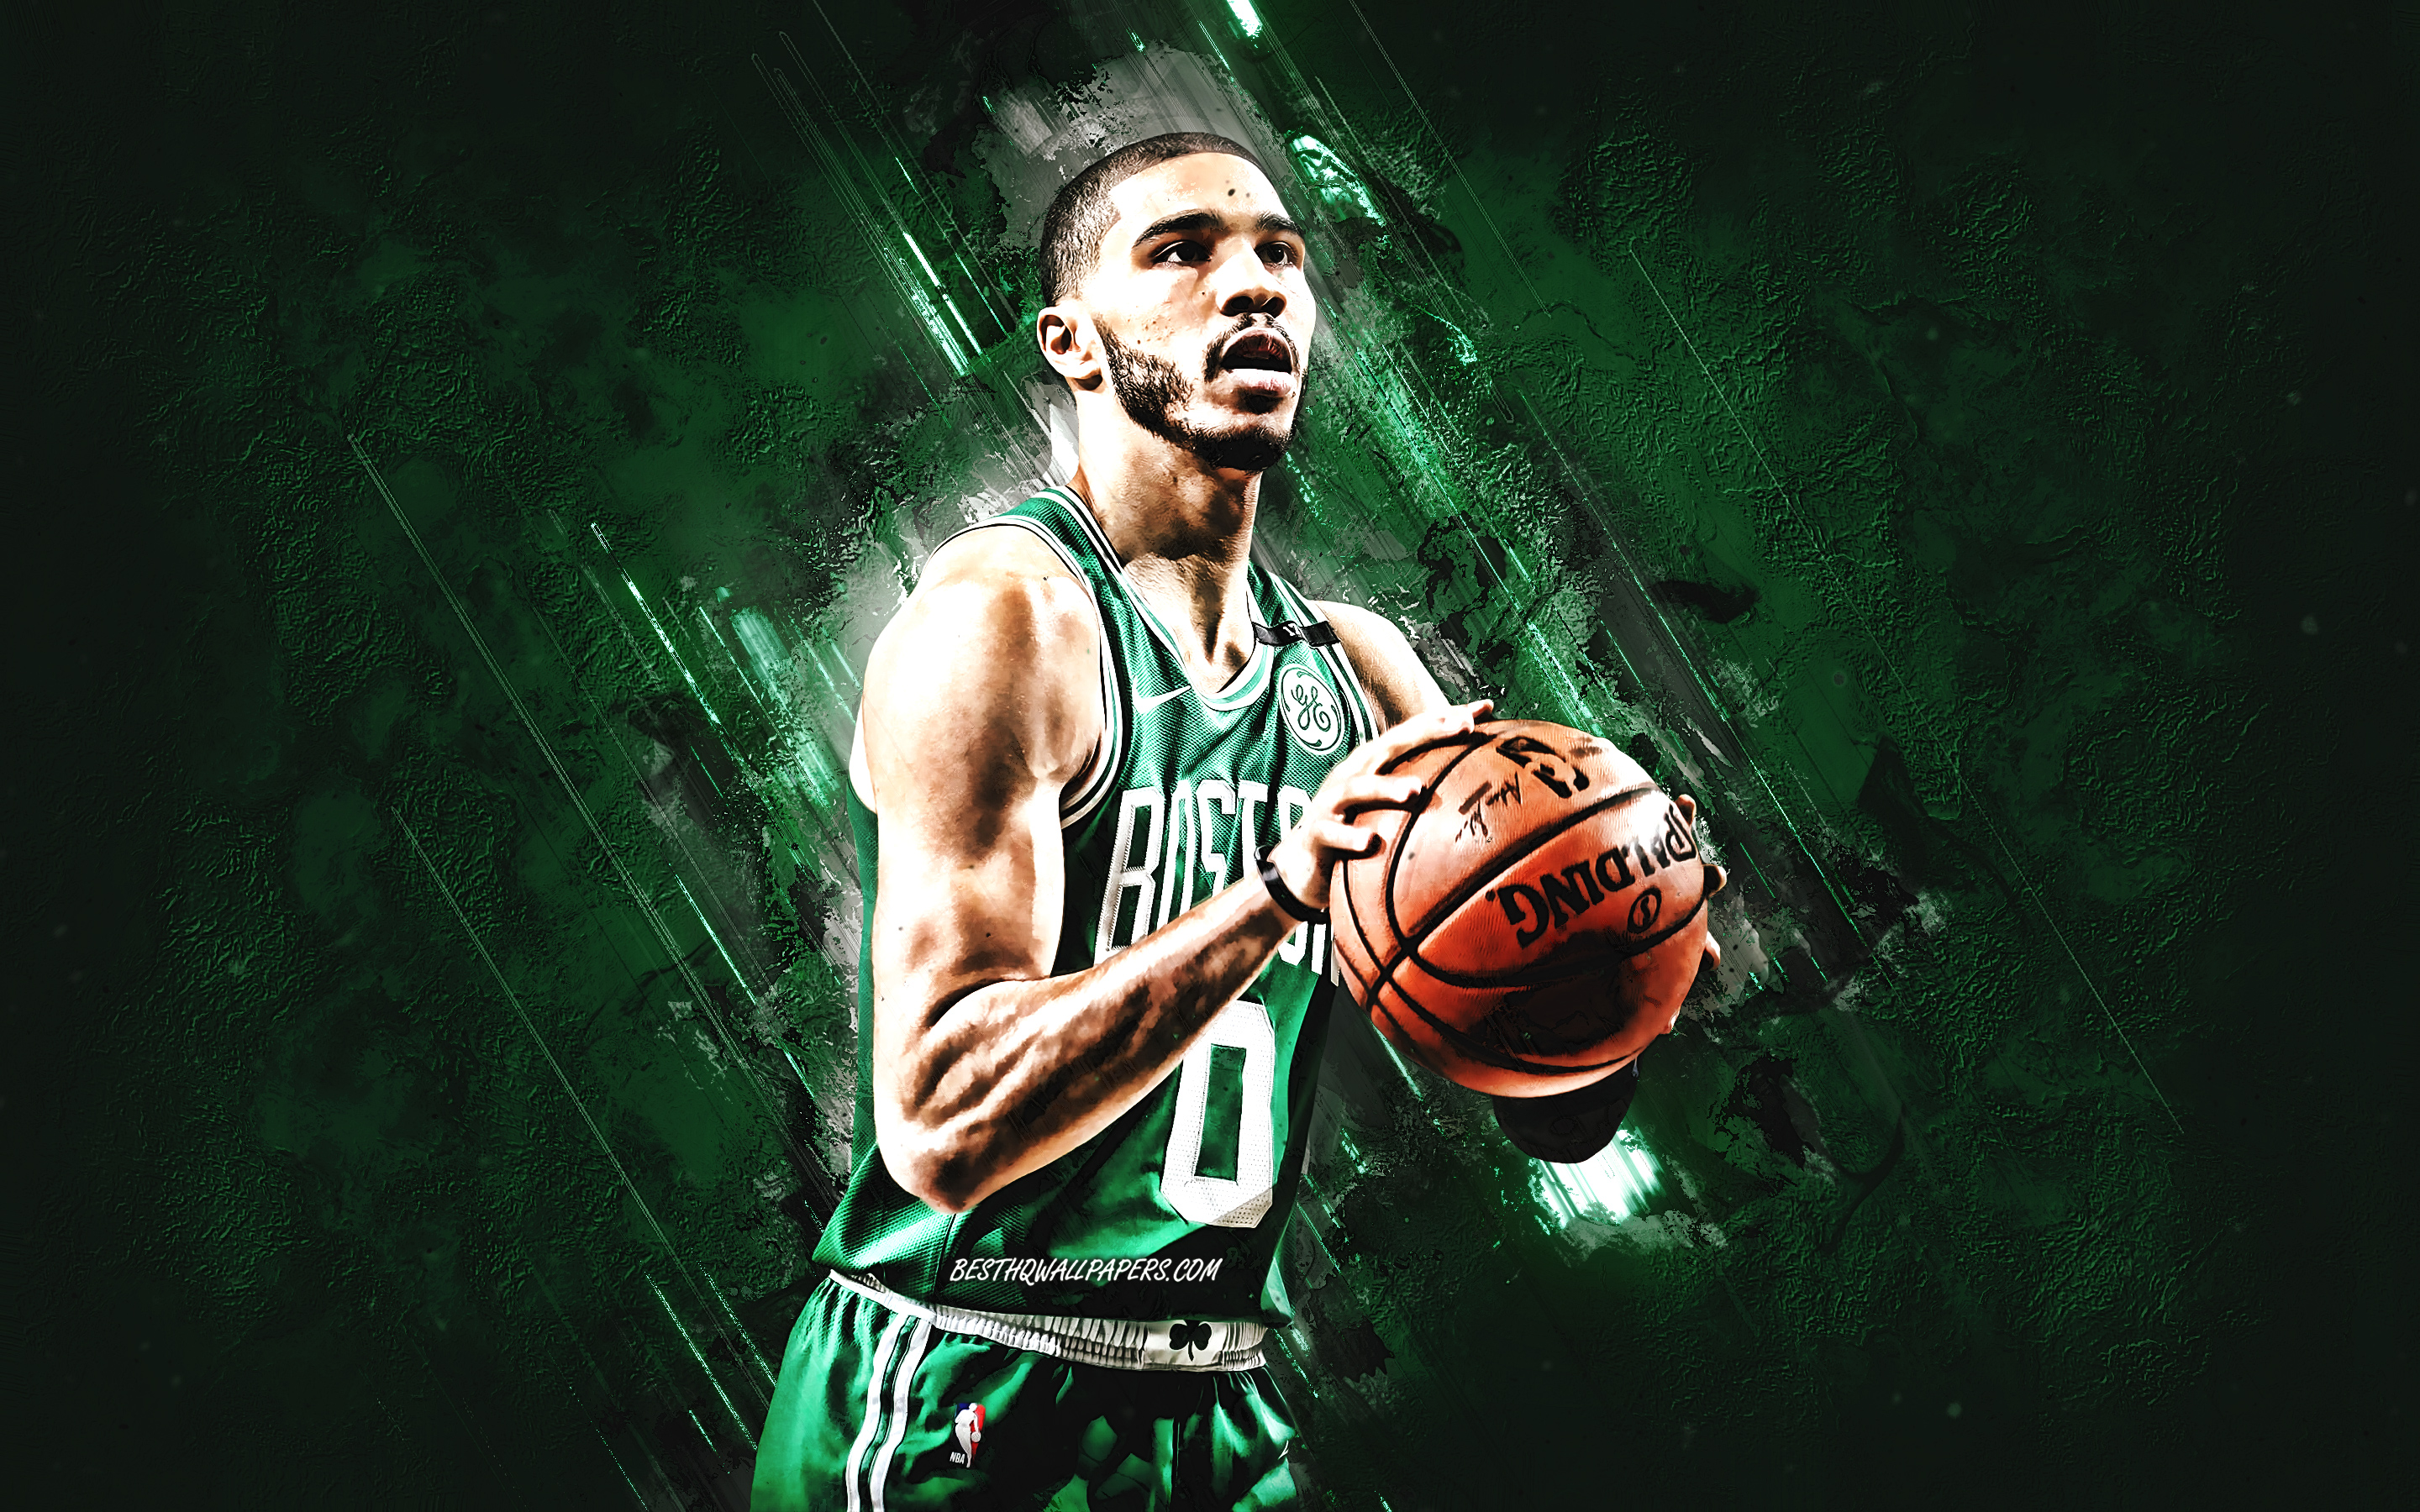 Download wallpaper Jayson Tatum, NBA, Boston Celtics, green stone background, American Basketball Player, portrait, USA, basketball, Boston Celtics players for desktop with resolution 2880x1800. High Quality HD picture wallpaper